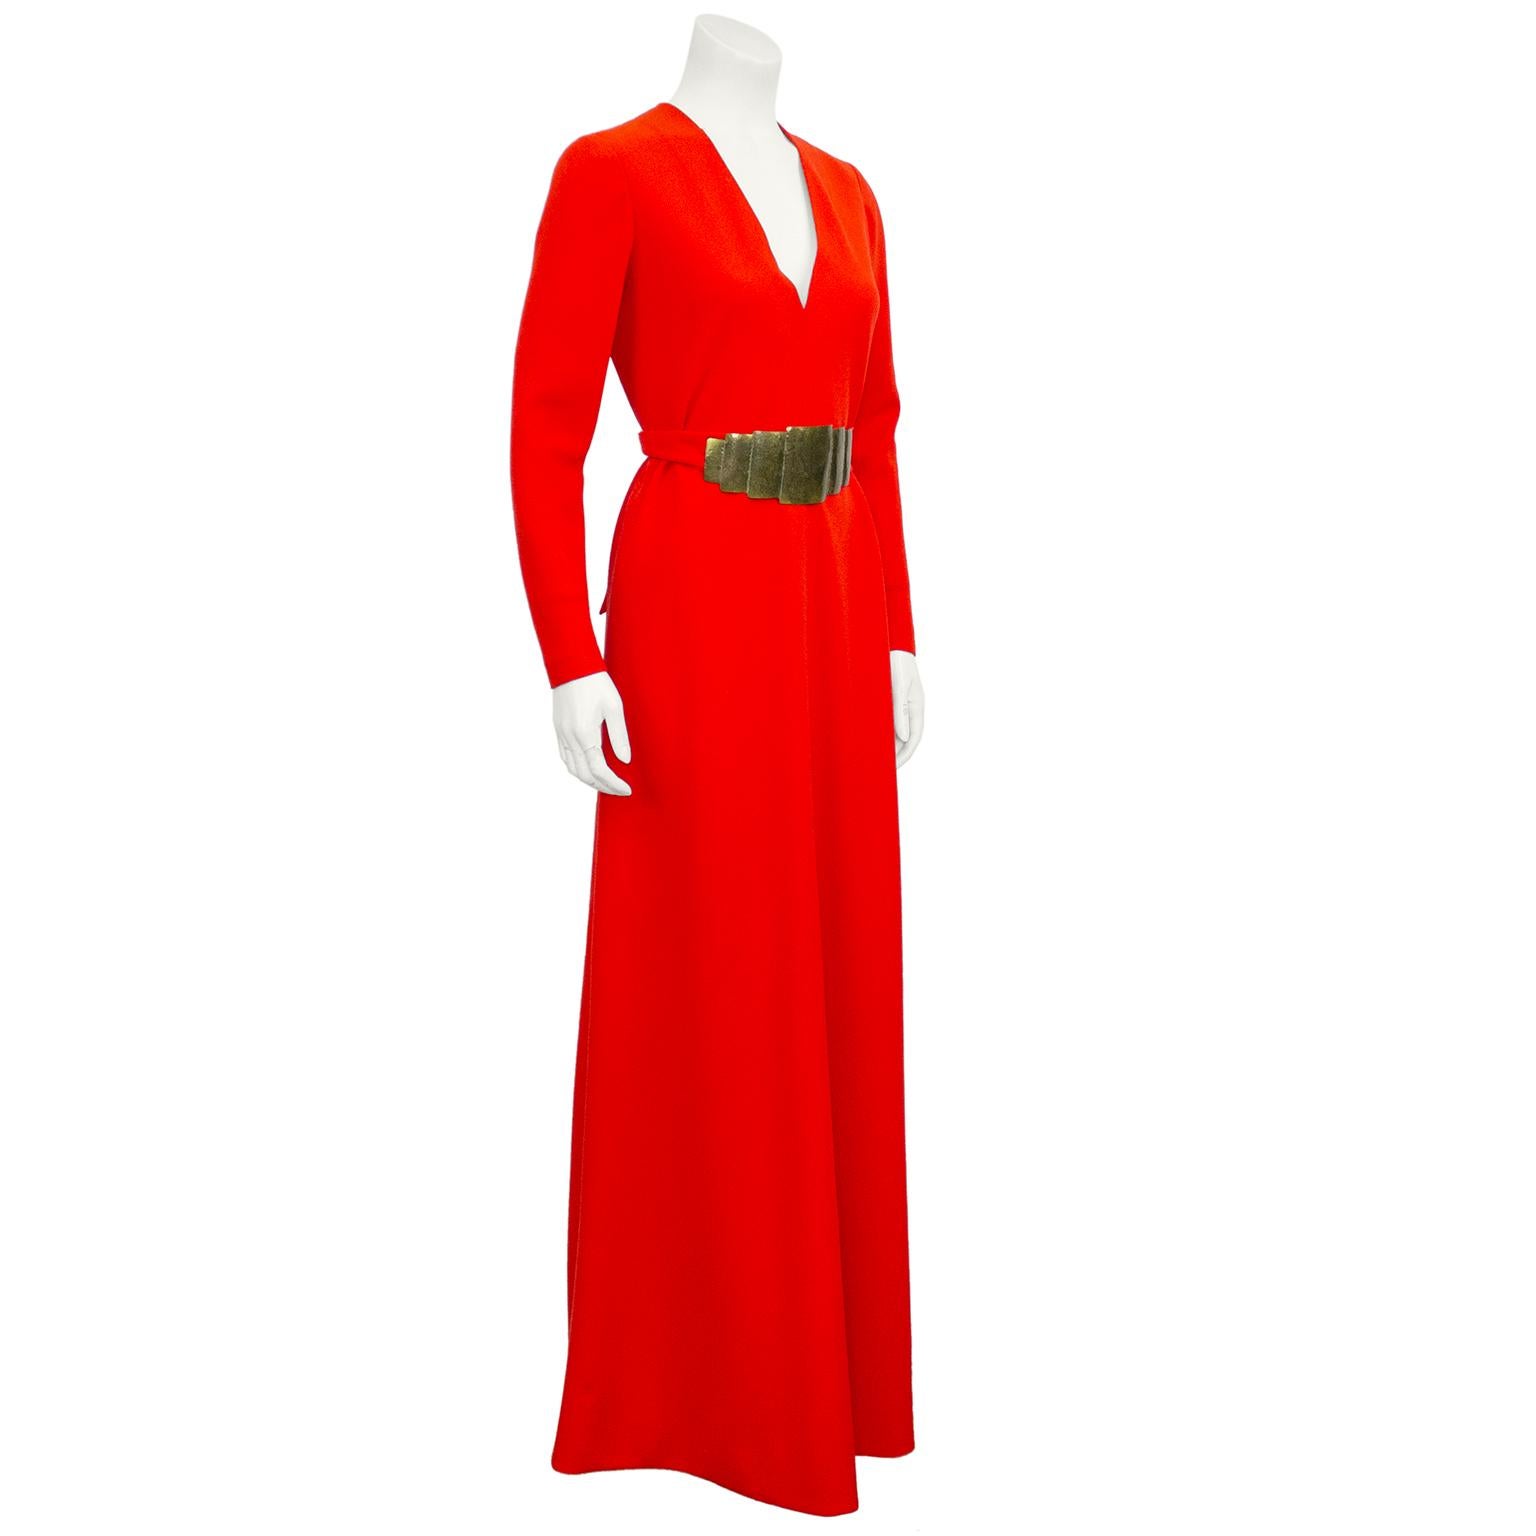 1970's sophisticated flame red rayon crepe V-Neck gown with hand made gilt metal waist ornament. This dress is one of a small selection of pieces from the closet of a renowned Hollywood musical celebrity. She was part of a performing family and her